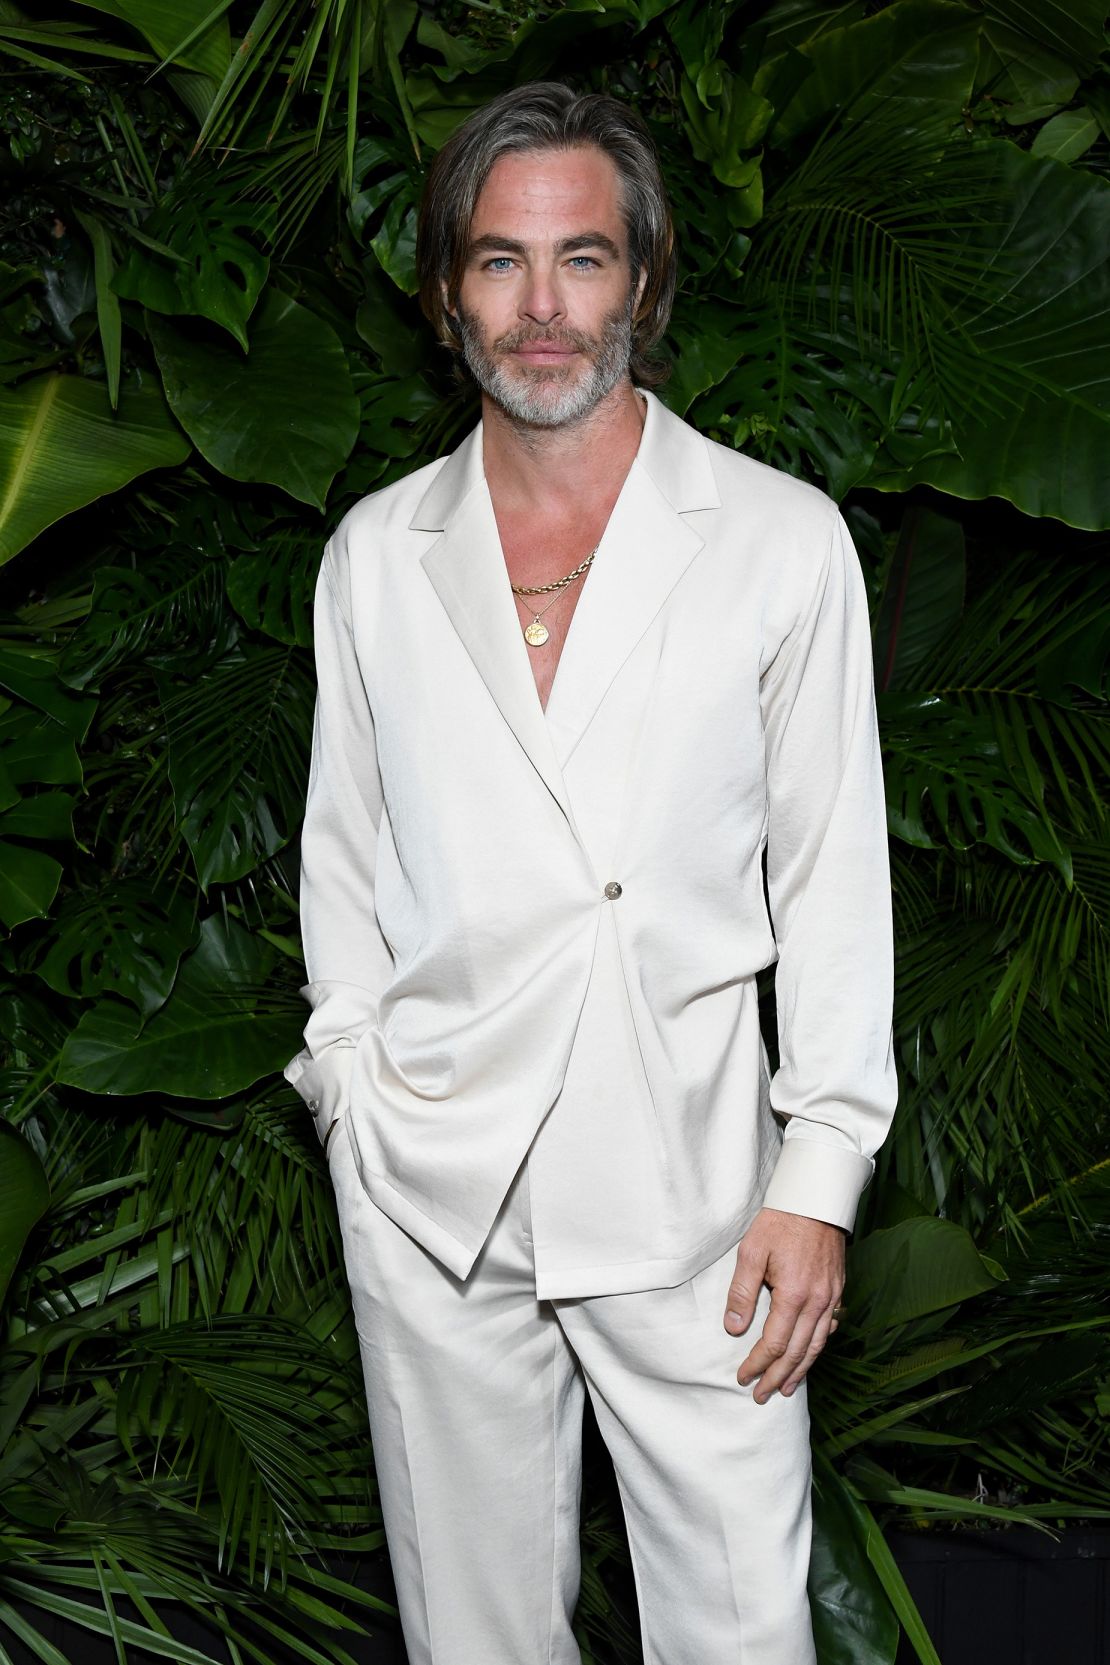 Pine in crisp cream pajama-style suiting at a Chanel event in Beverly Hills, California on March 26, 2022.